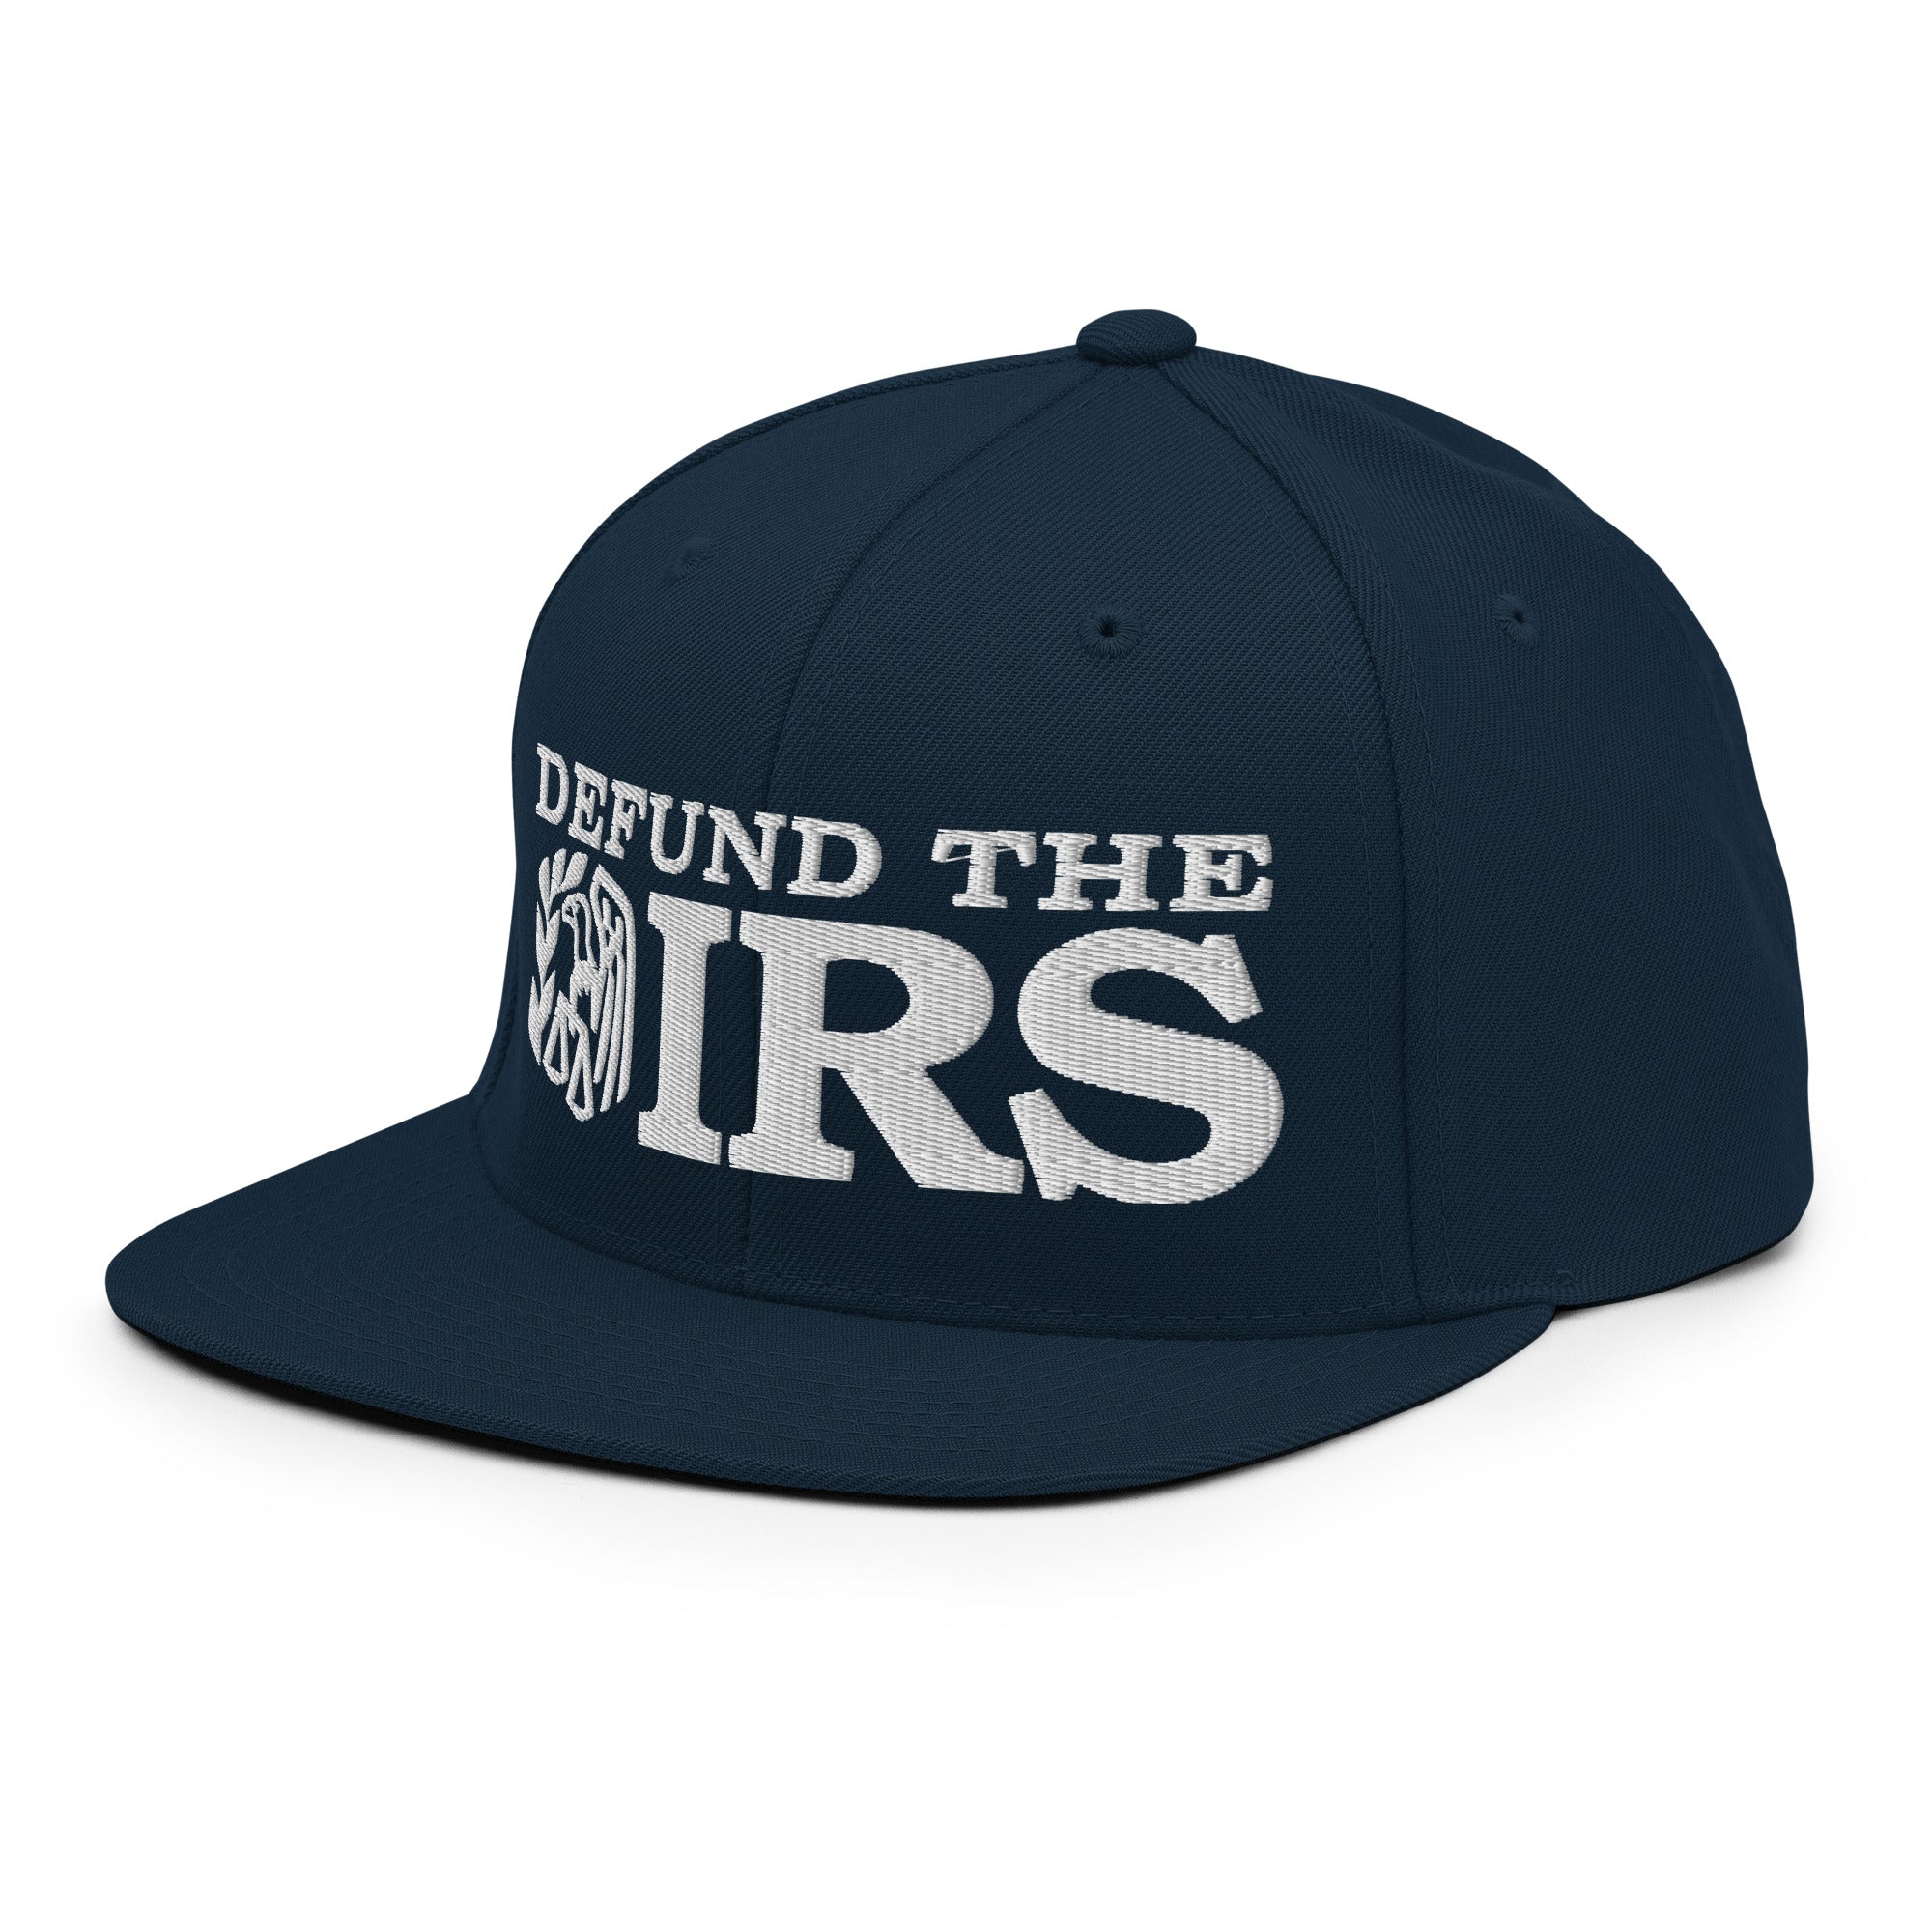 Defund the IRS Snapback Hat